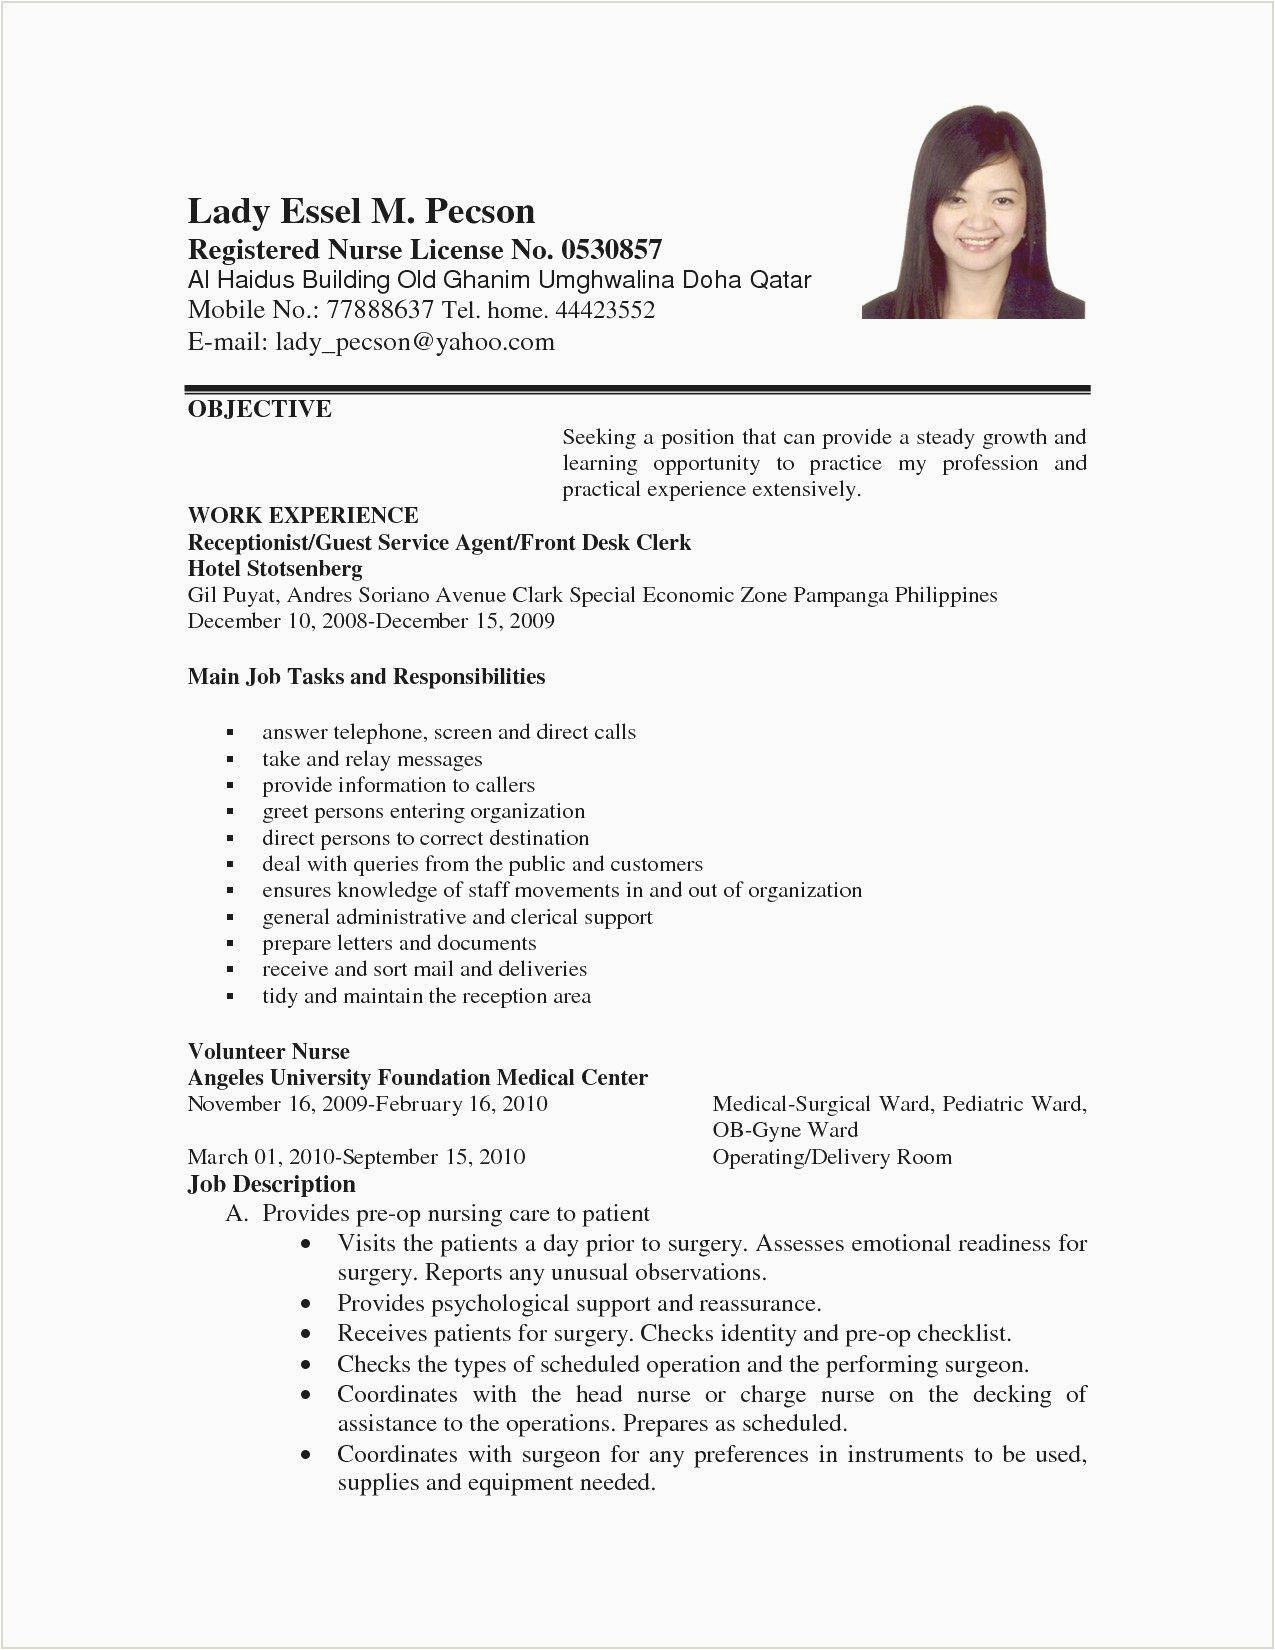 Sample Resume for Call Center Agent without Experience Call Center Resume Sample No Experience Best Resume Examples